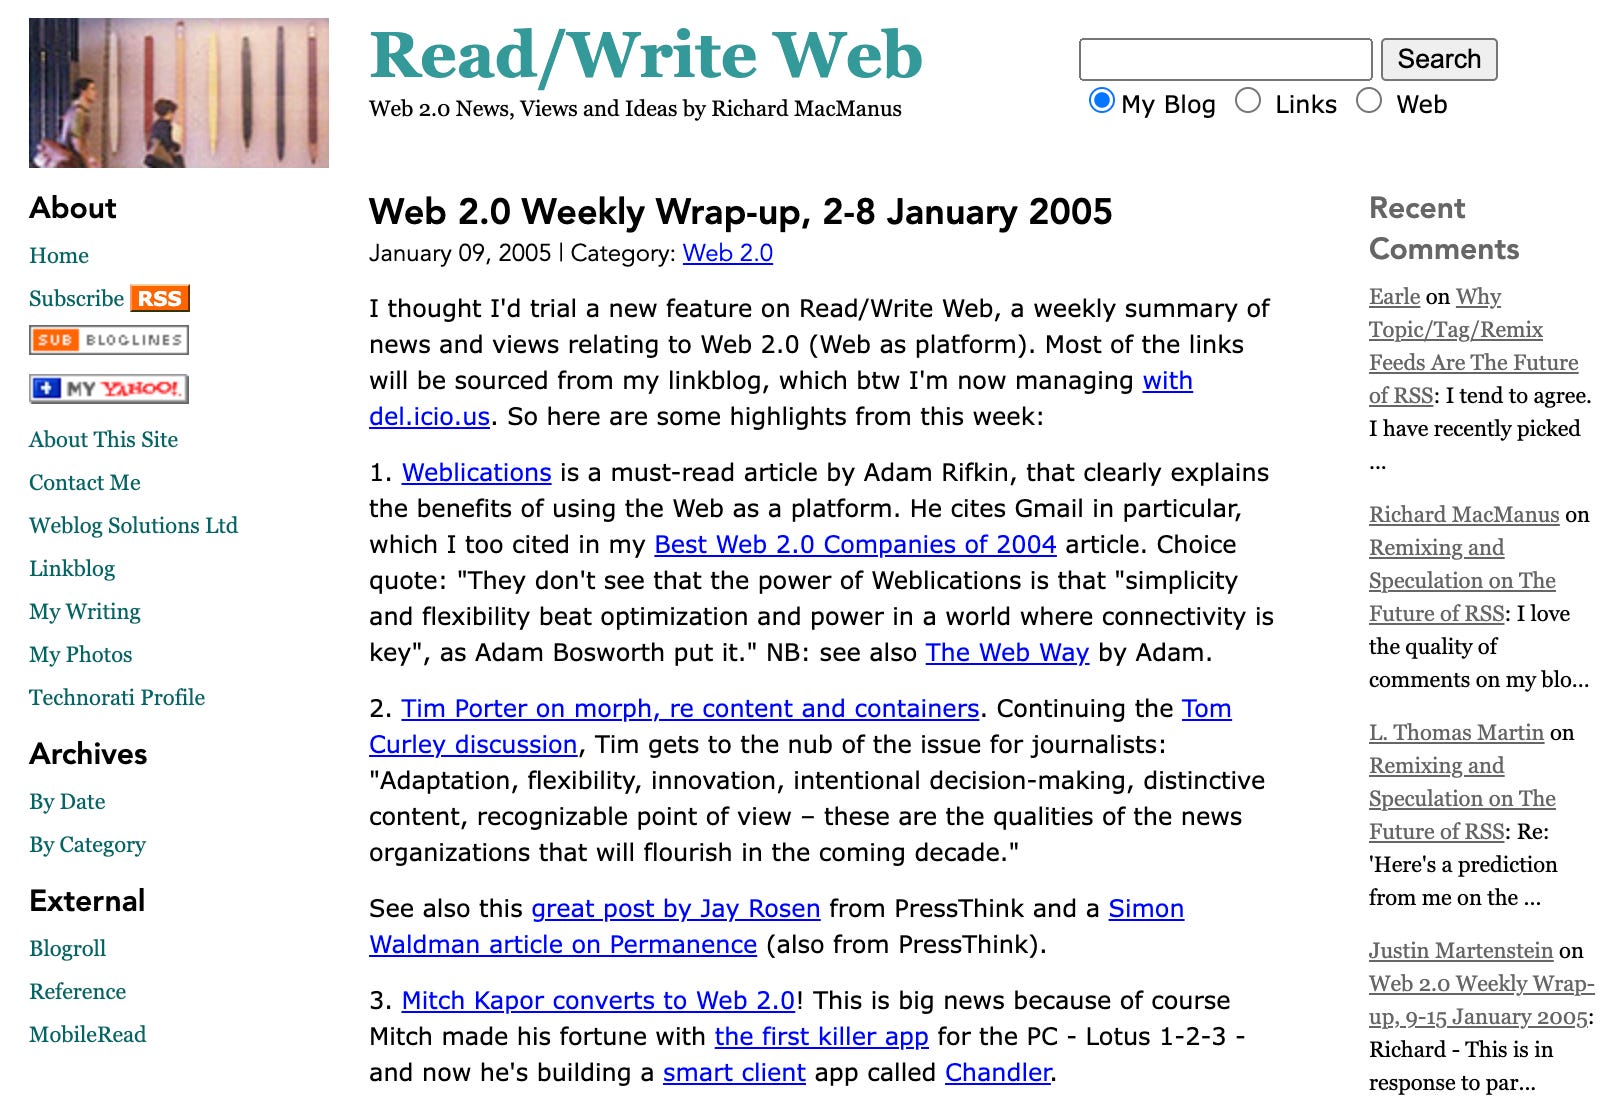 The first Web 2.0 Weekly Wrap-up